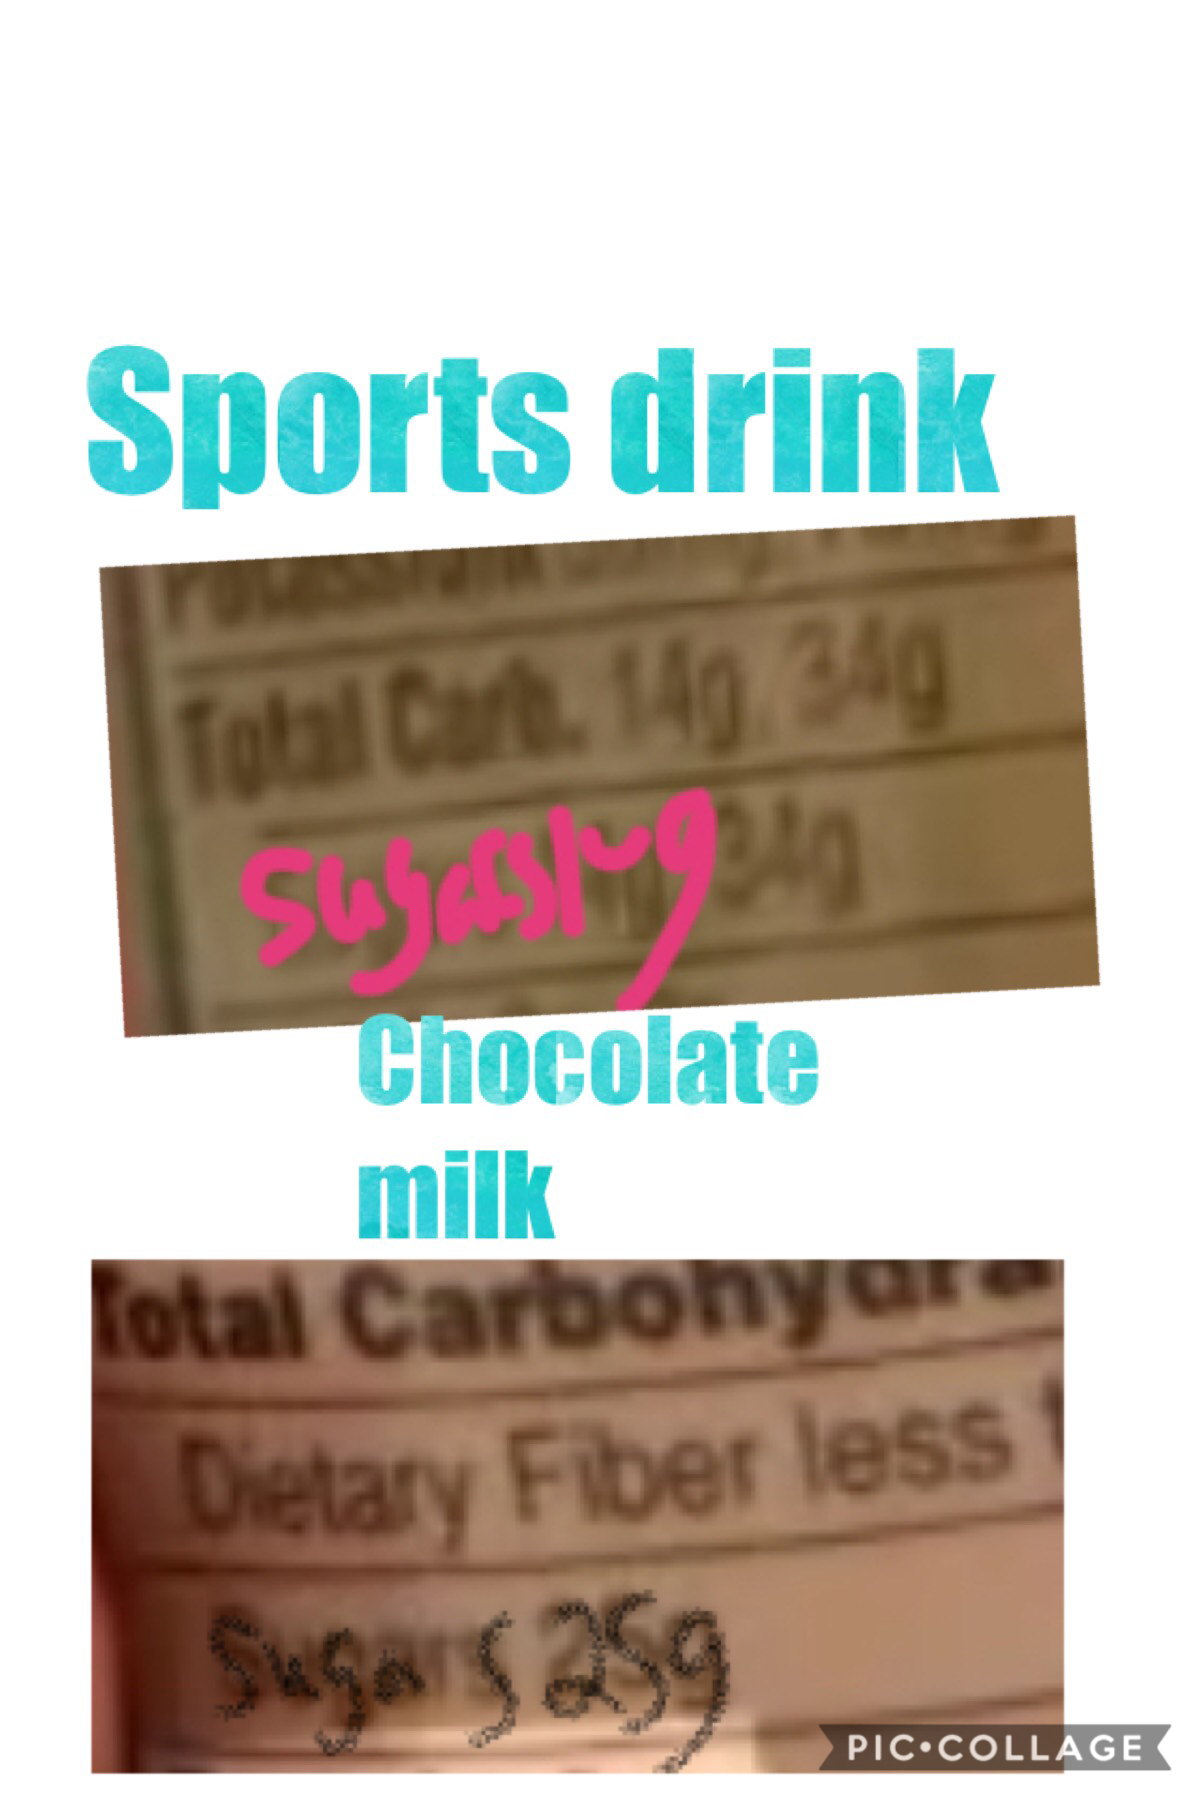 A videos trying to say chocolate milk has less sugar than a sports drink they are liyingg